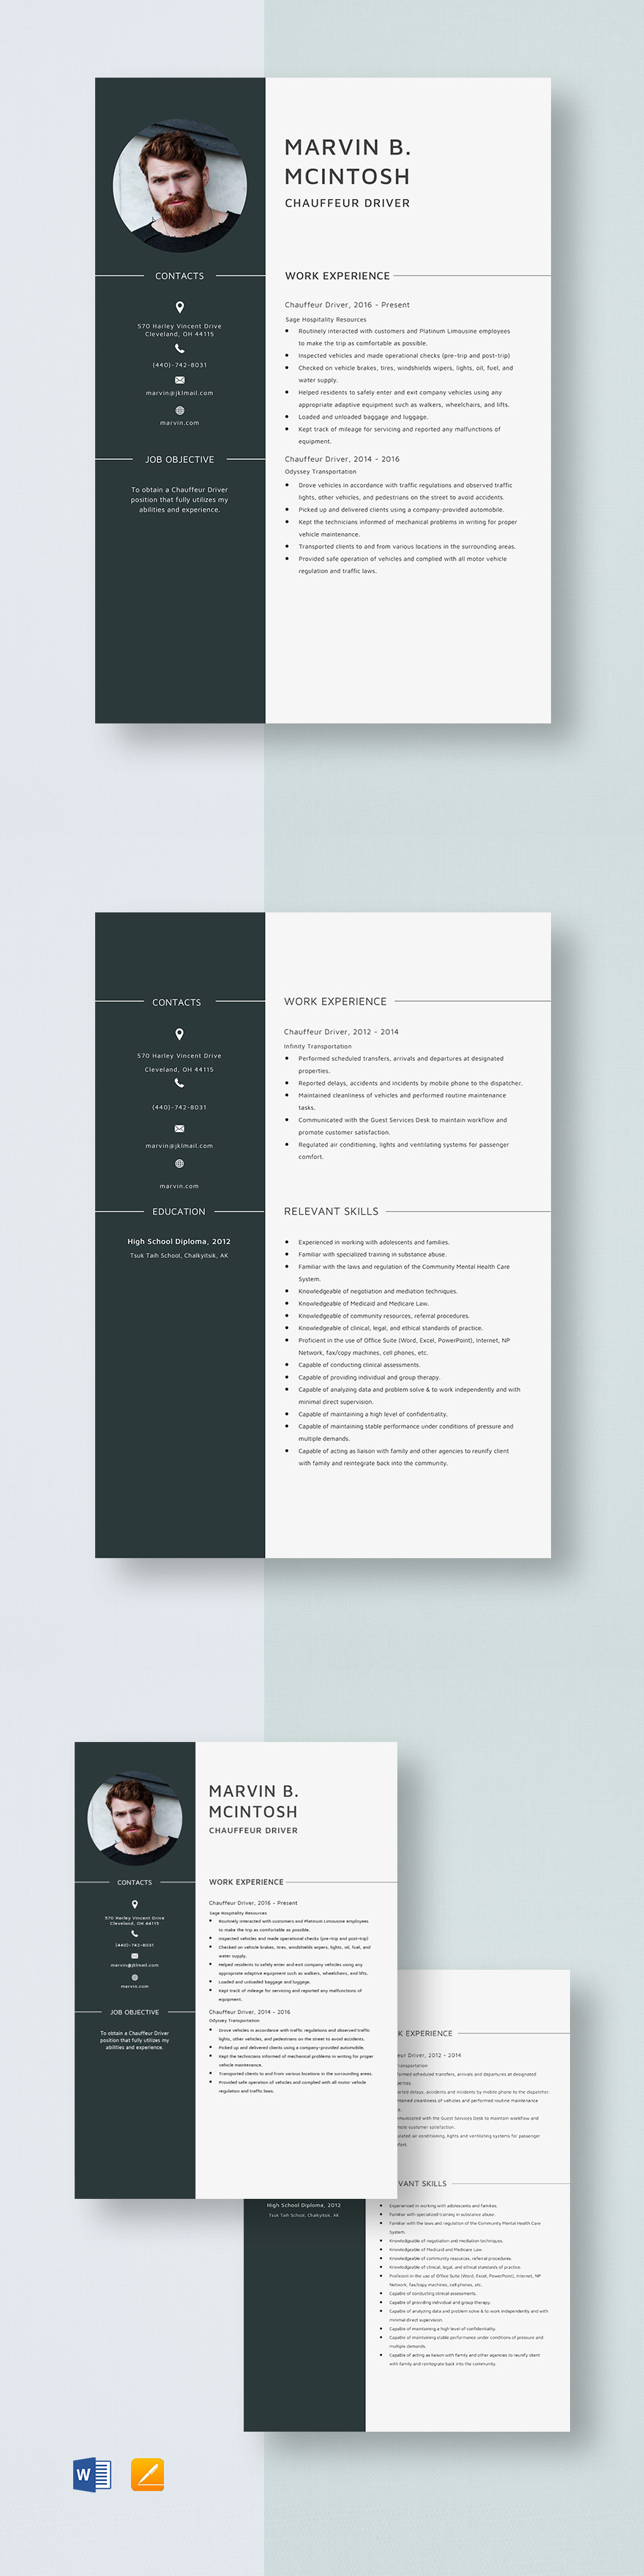 Chauffeur Driver Resume Template